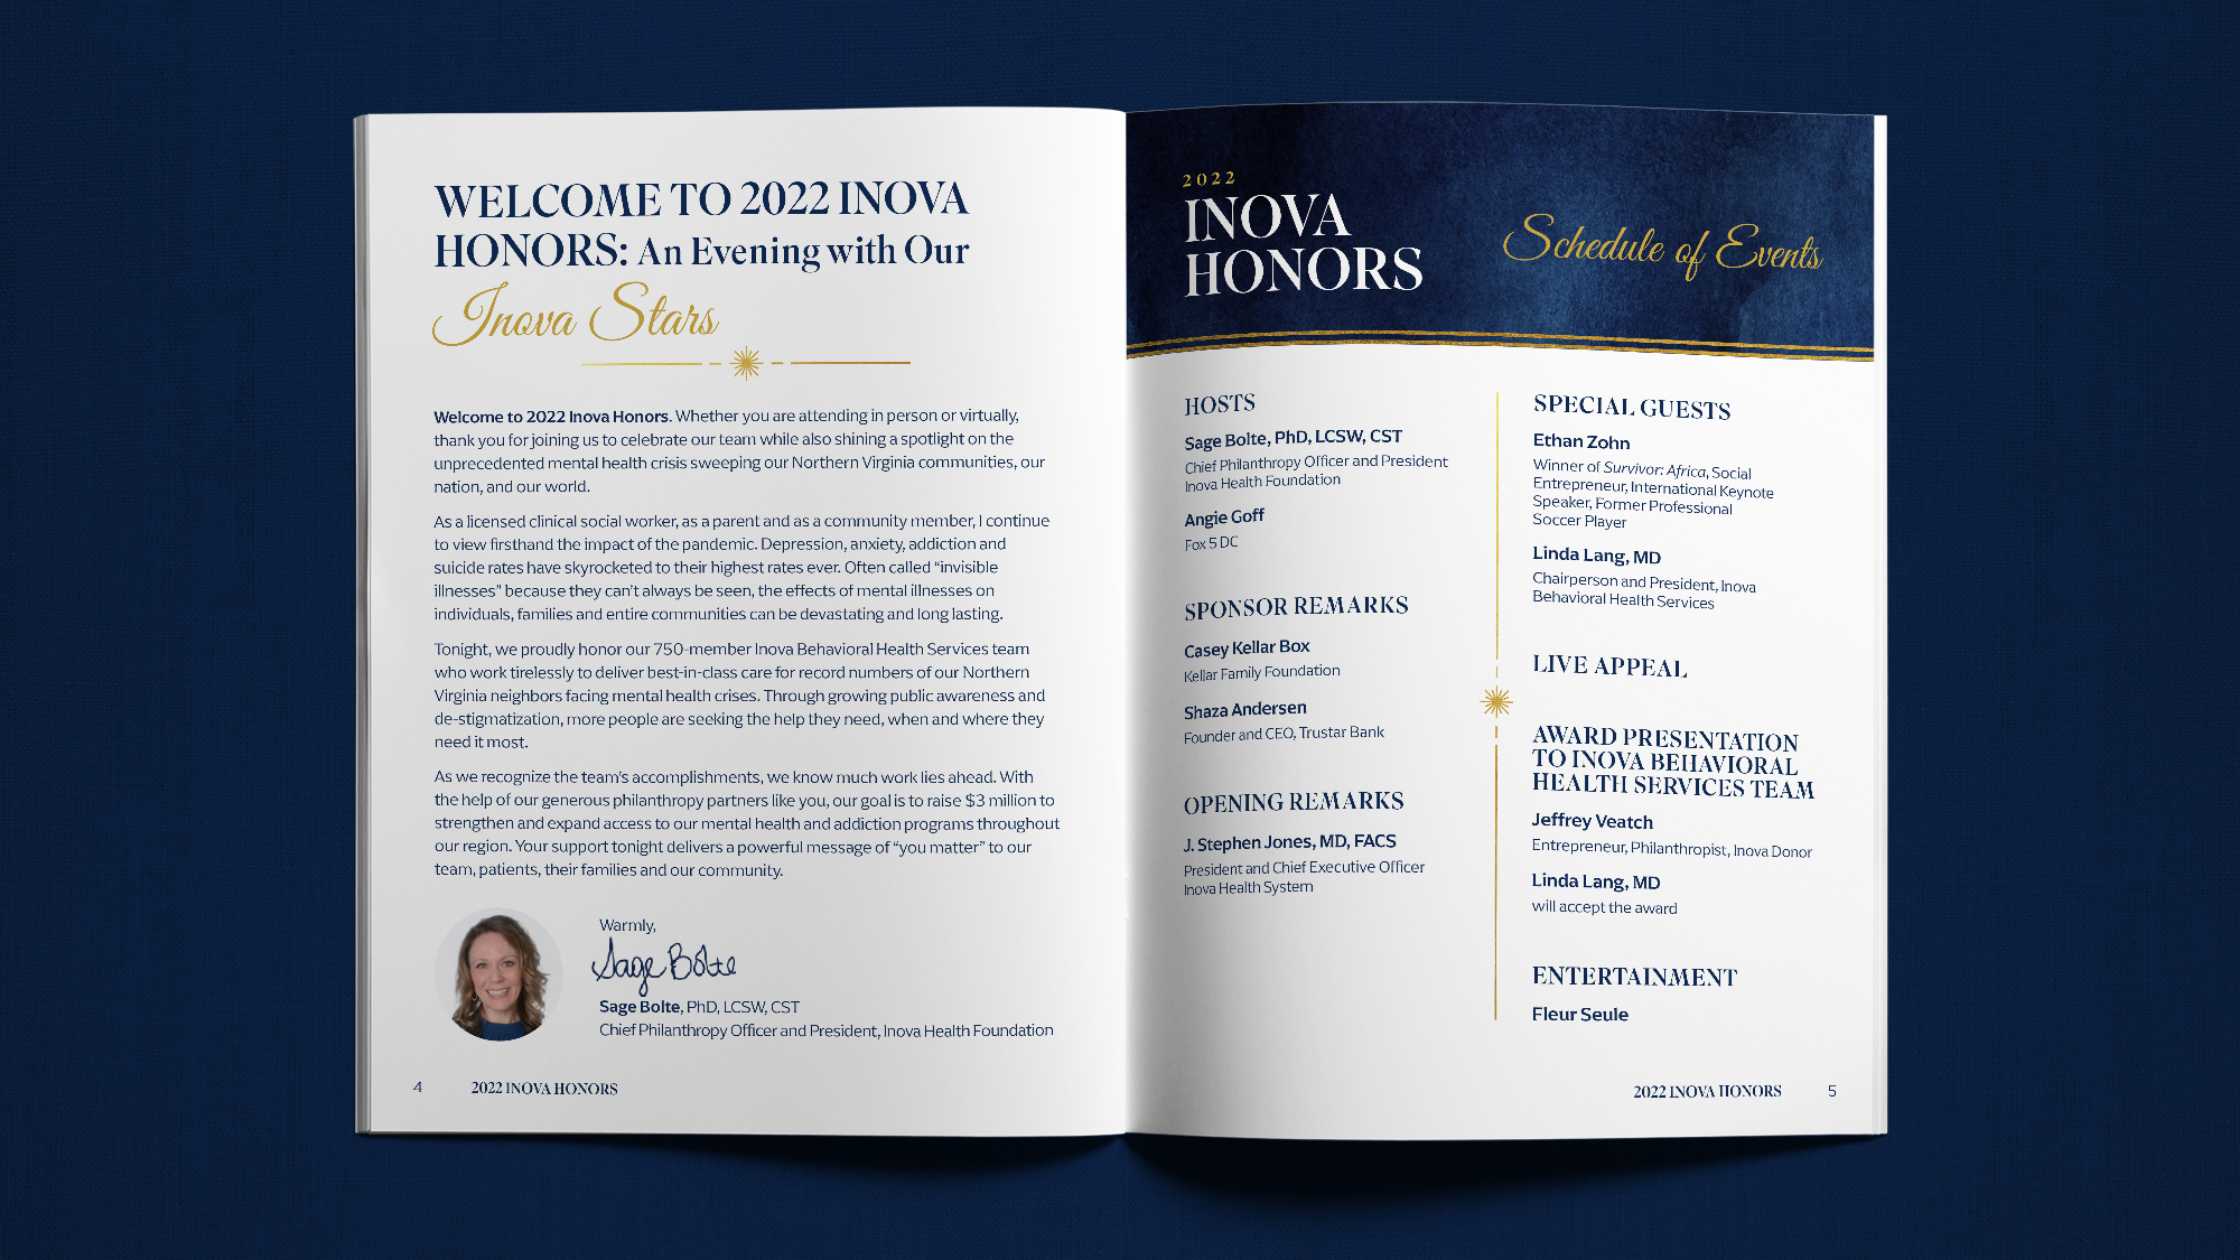 Gala event branding applied to the program booklet, which includes a welcome letter from President of Inova, and the schedule of events.